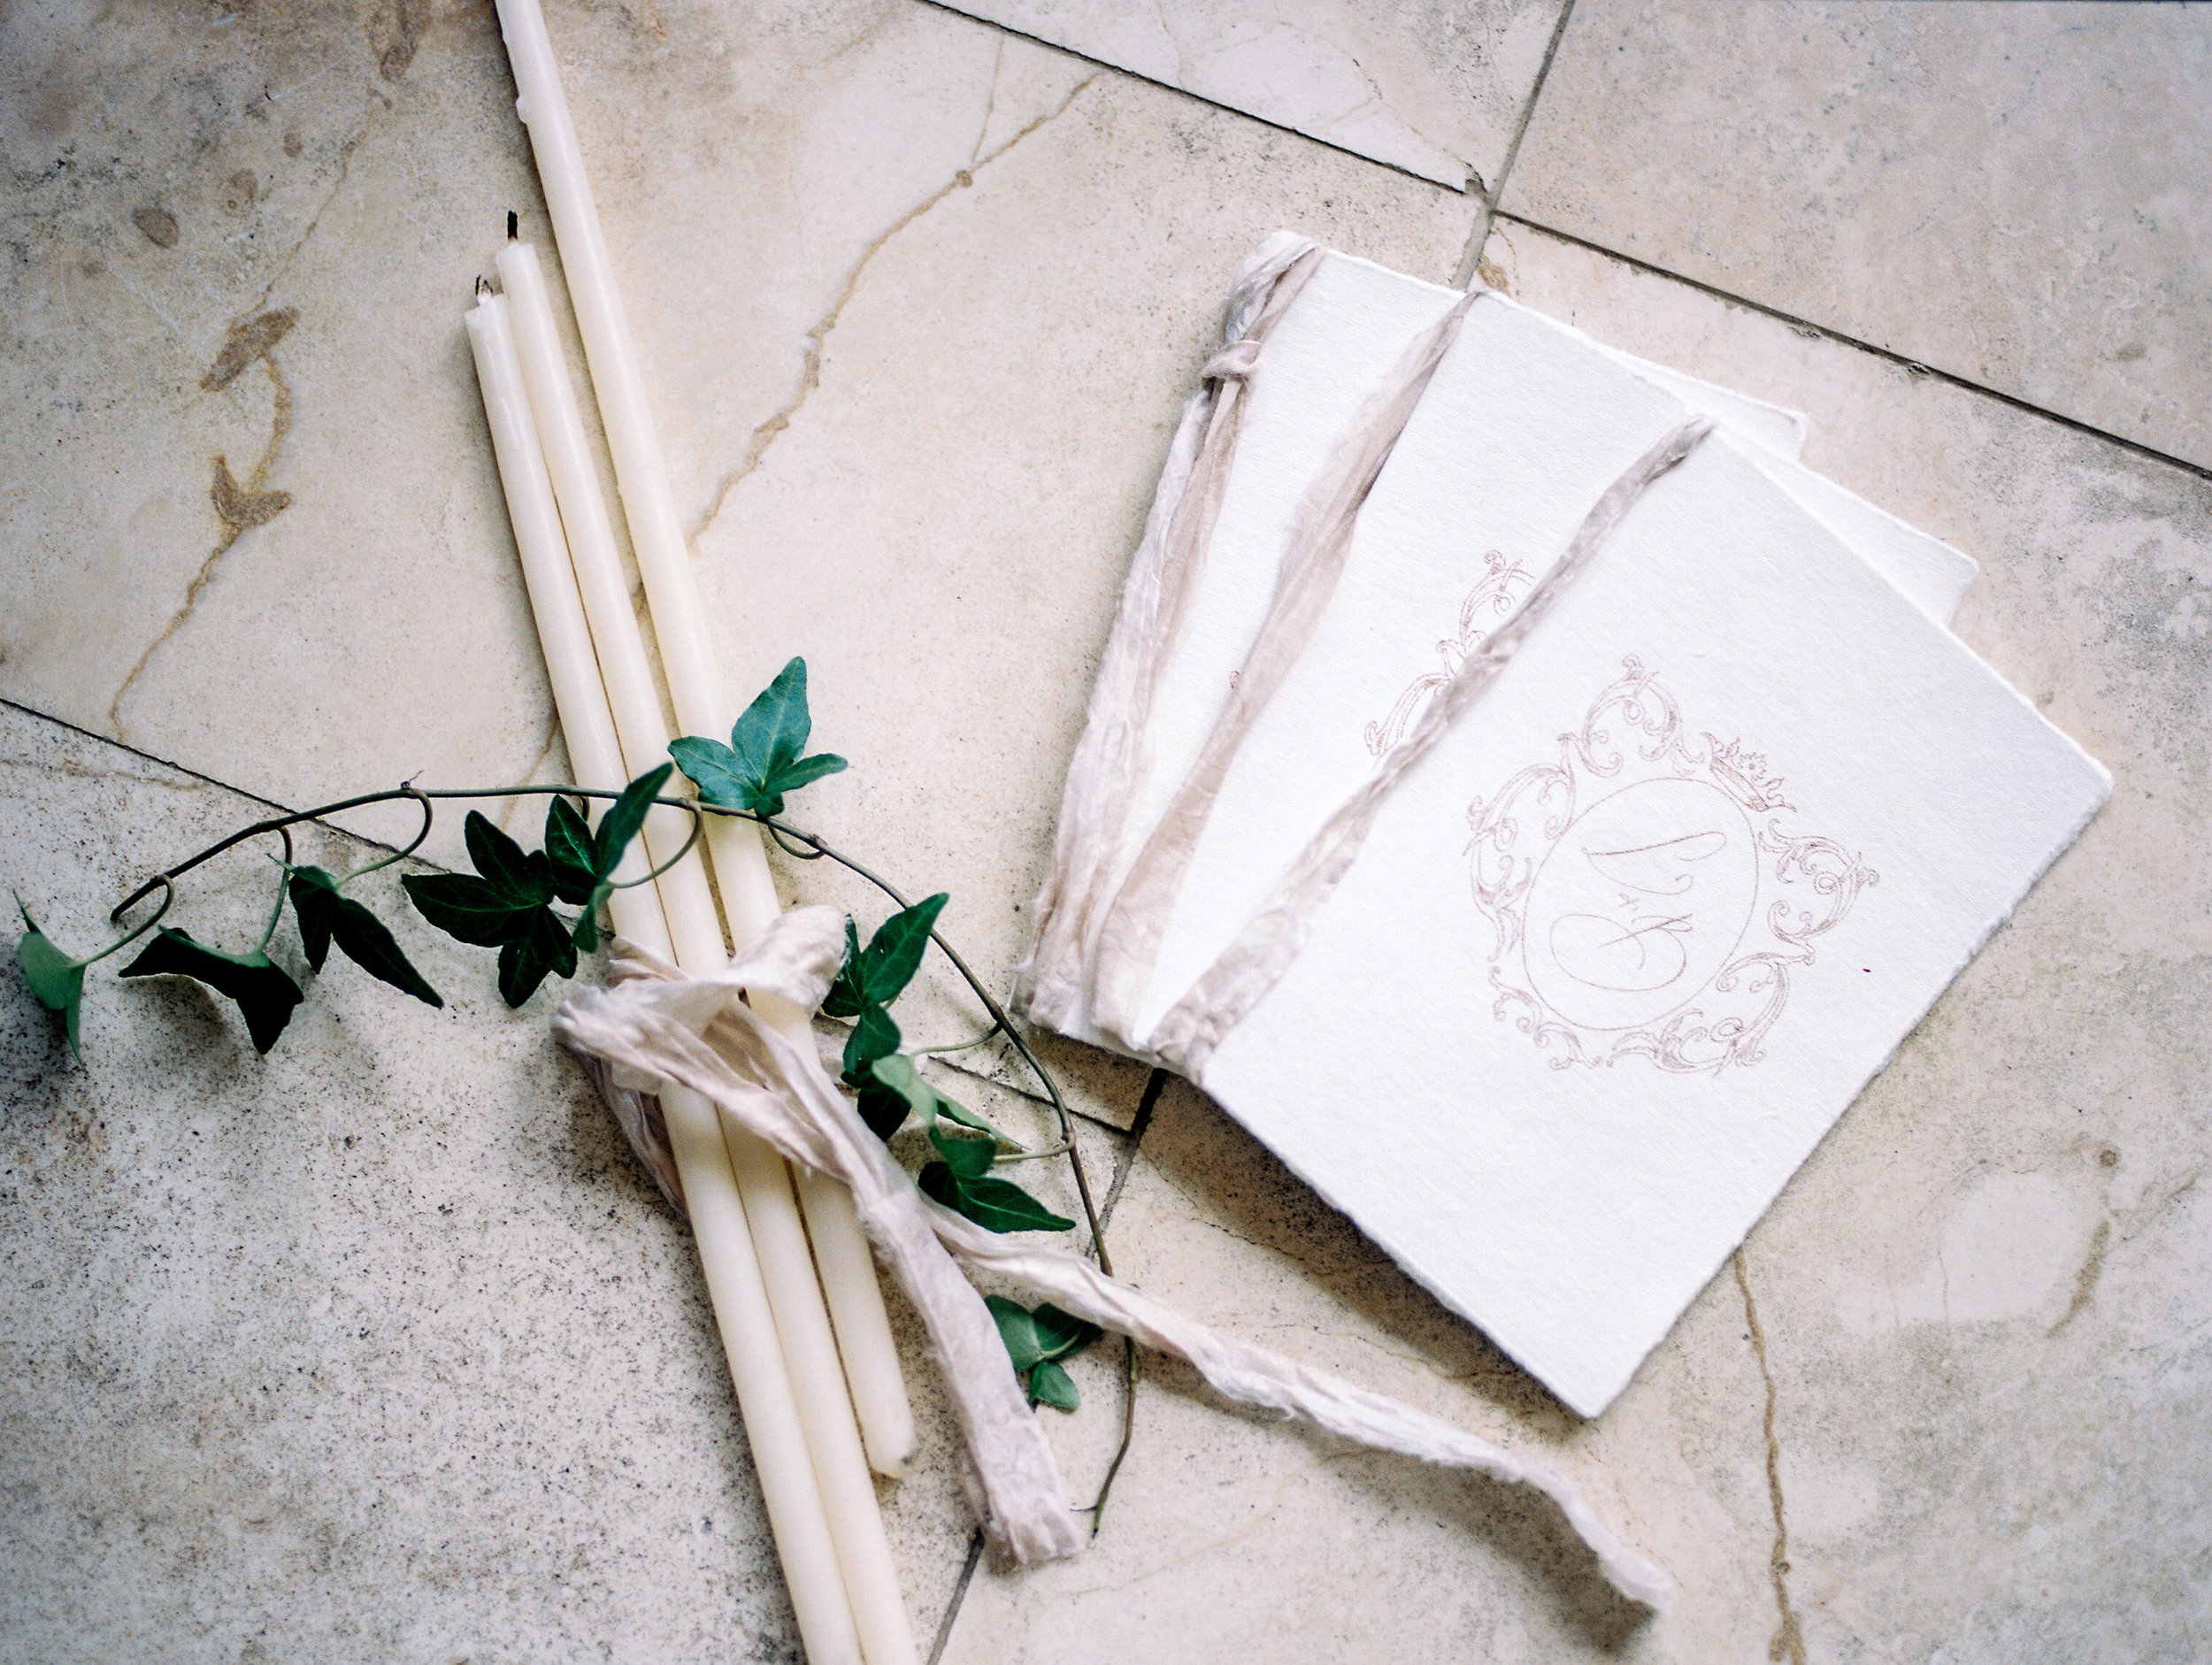 Paper Goods & Calligraphy: Spurlé Gul Studio | Photography: Lissa Ryan Photography | Planning & Creative Direction: Claire Duran Wedding & Events | Venue: Dover Hall Estate